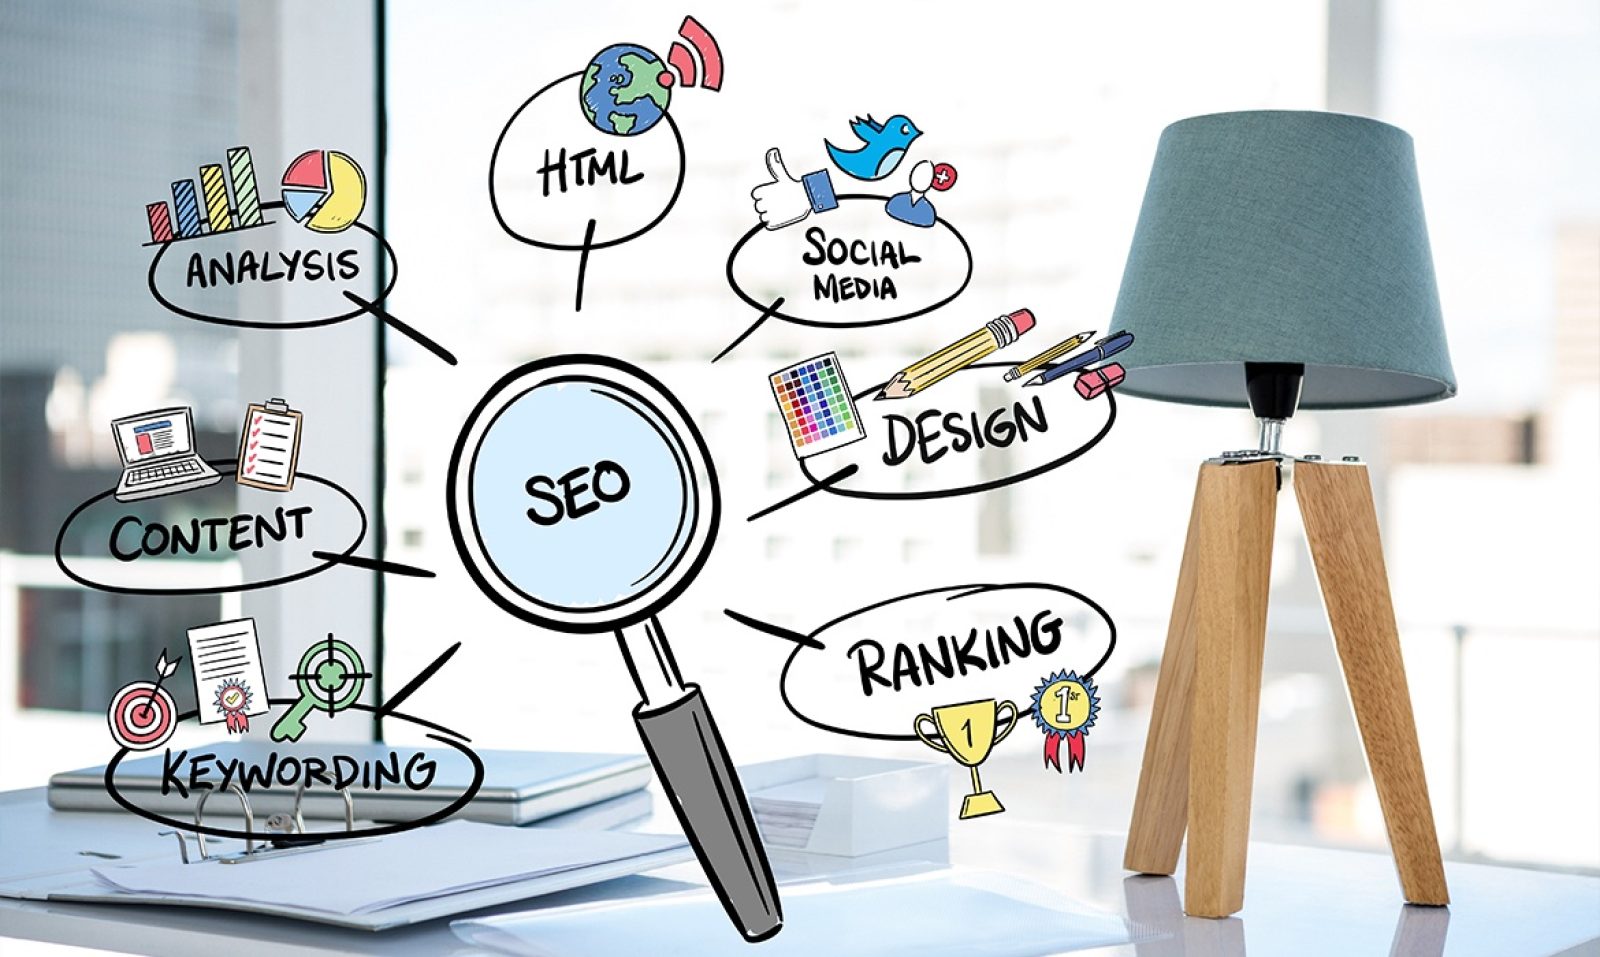 Do you need to hire an SEO agency